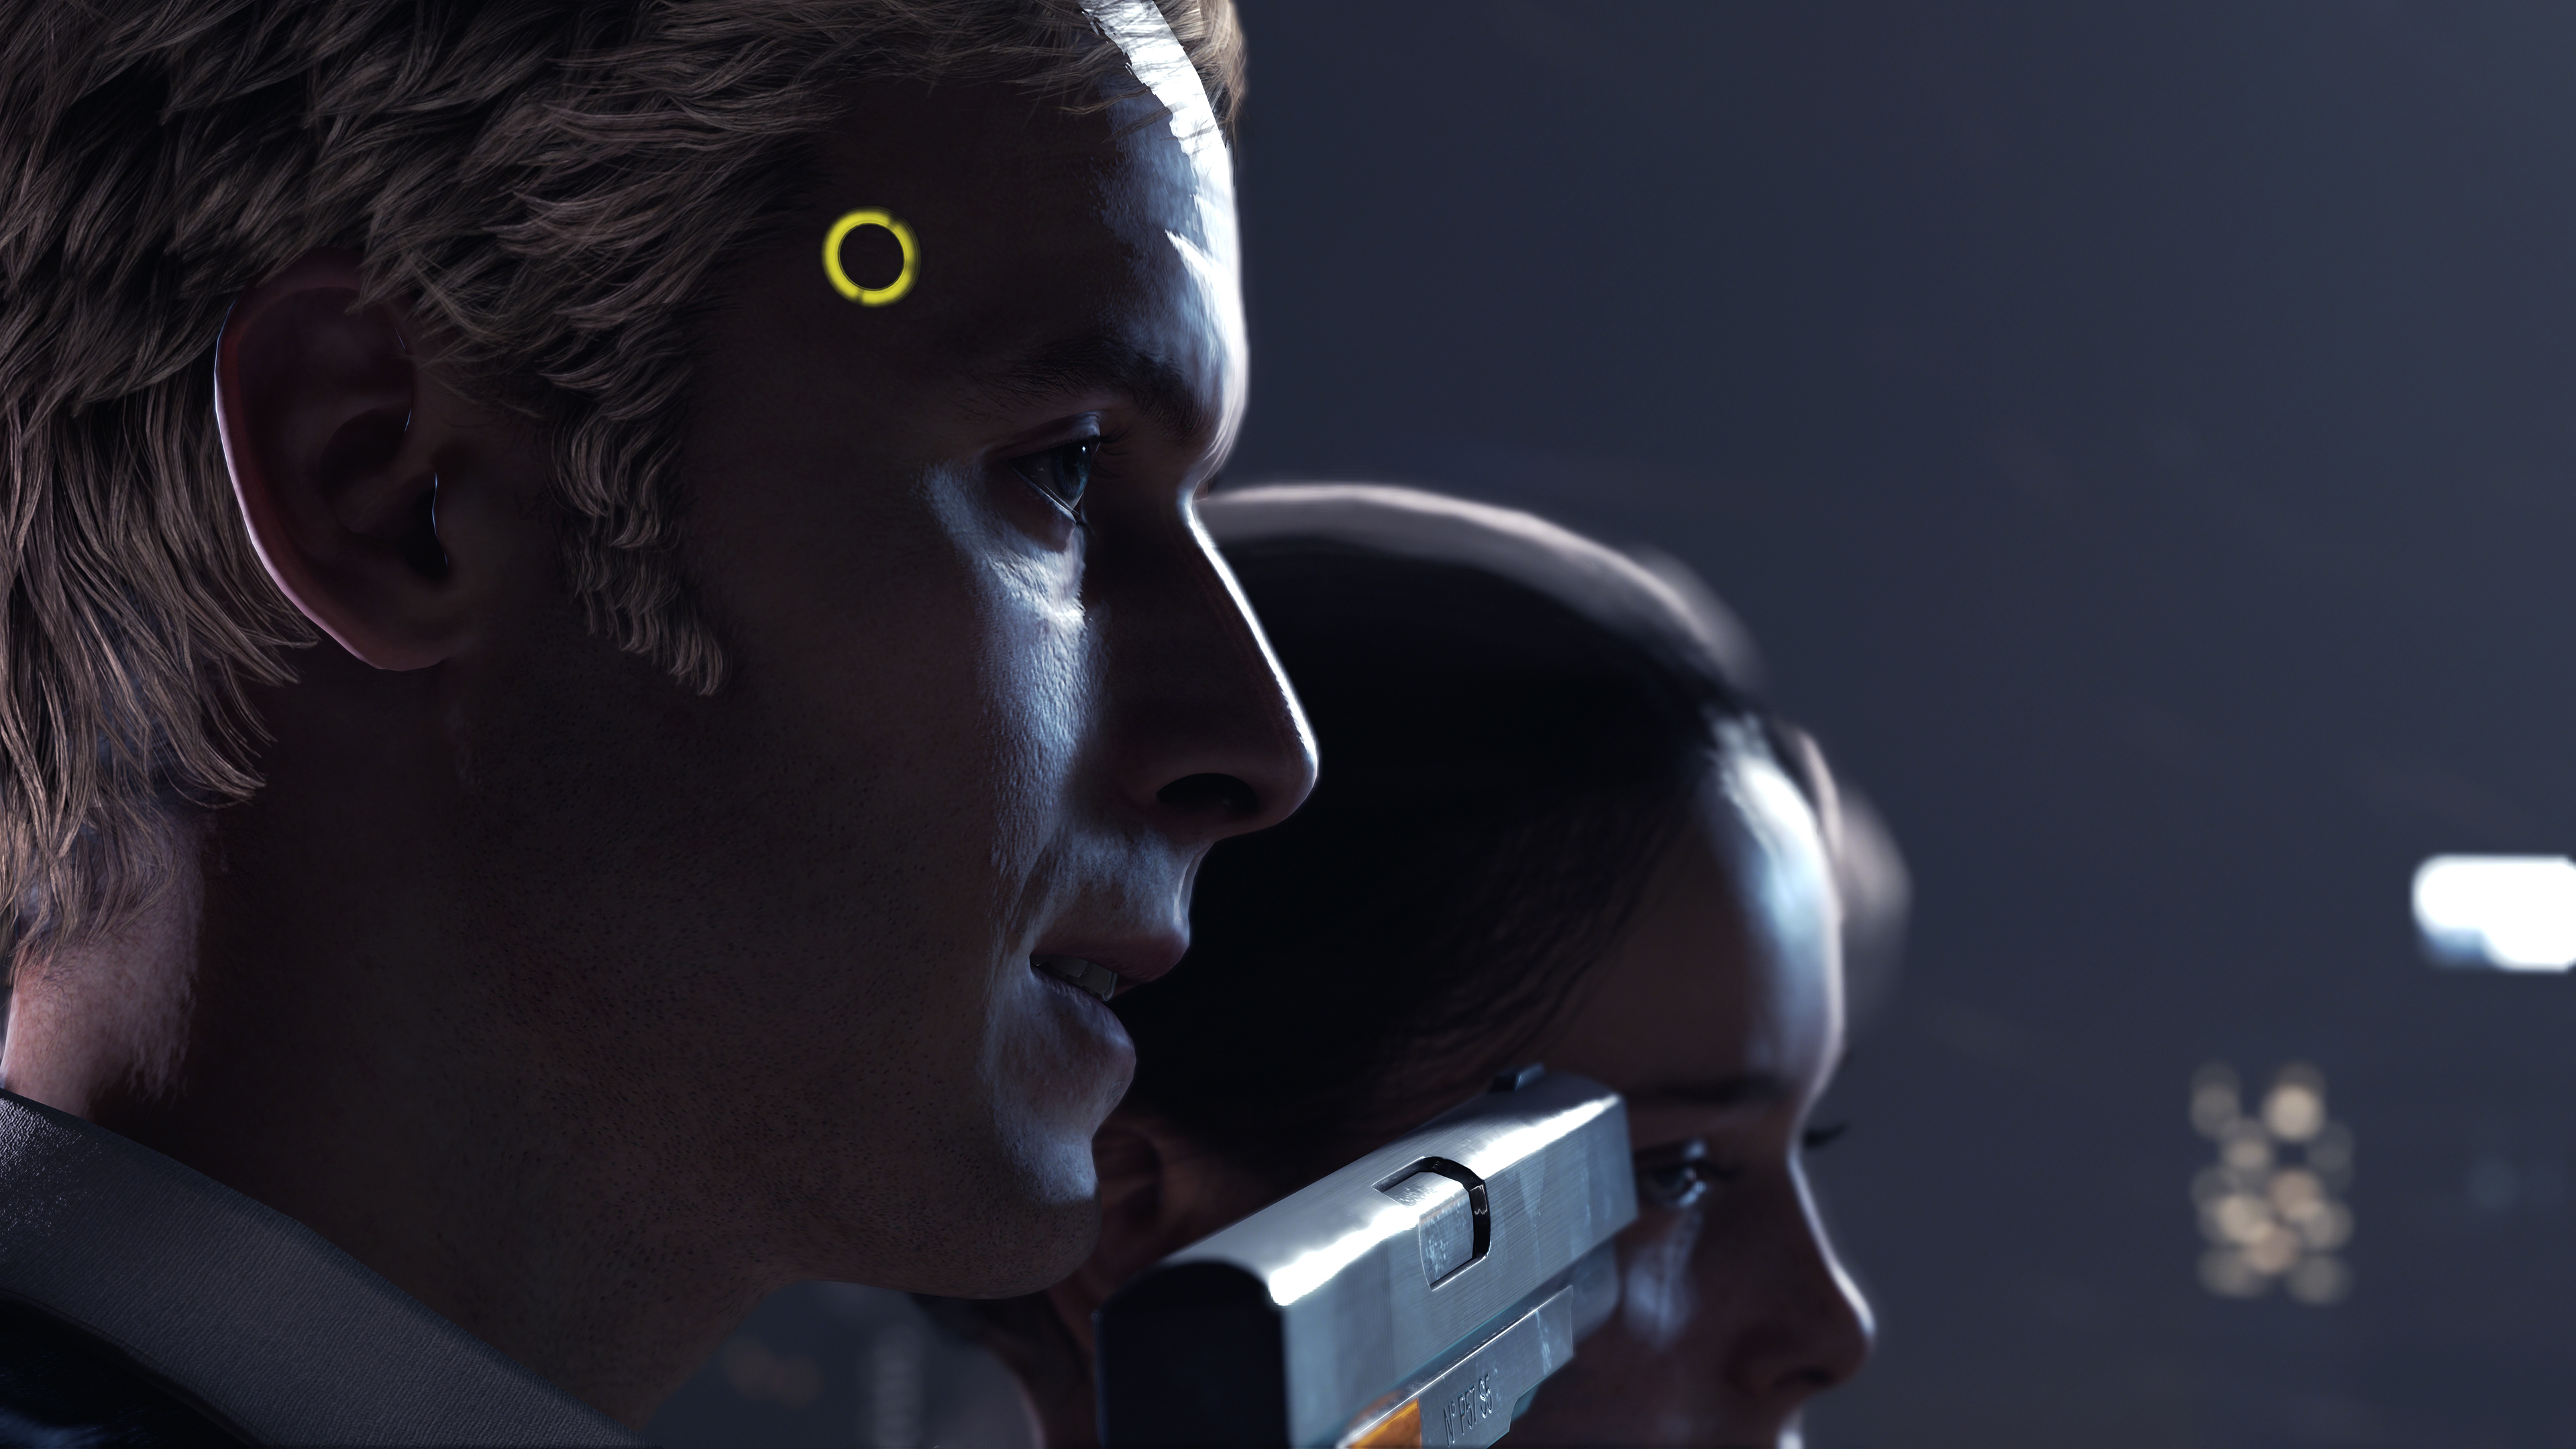 E3 2016: Detroit: Become Human shows off gameplay